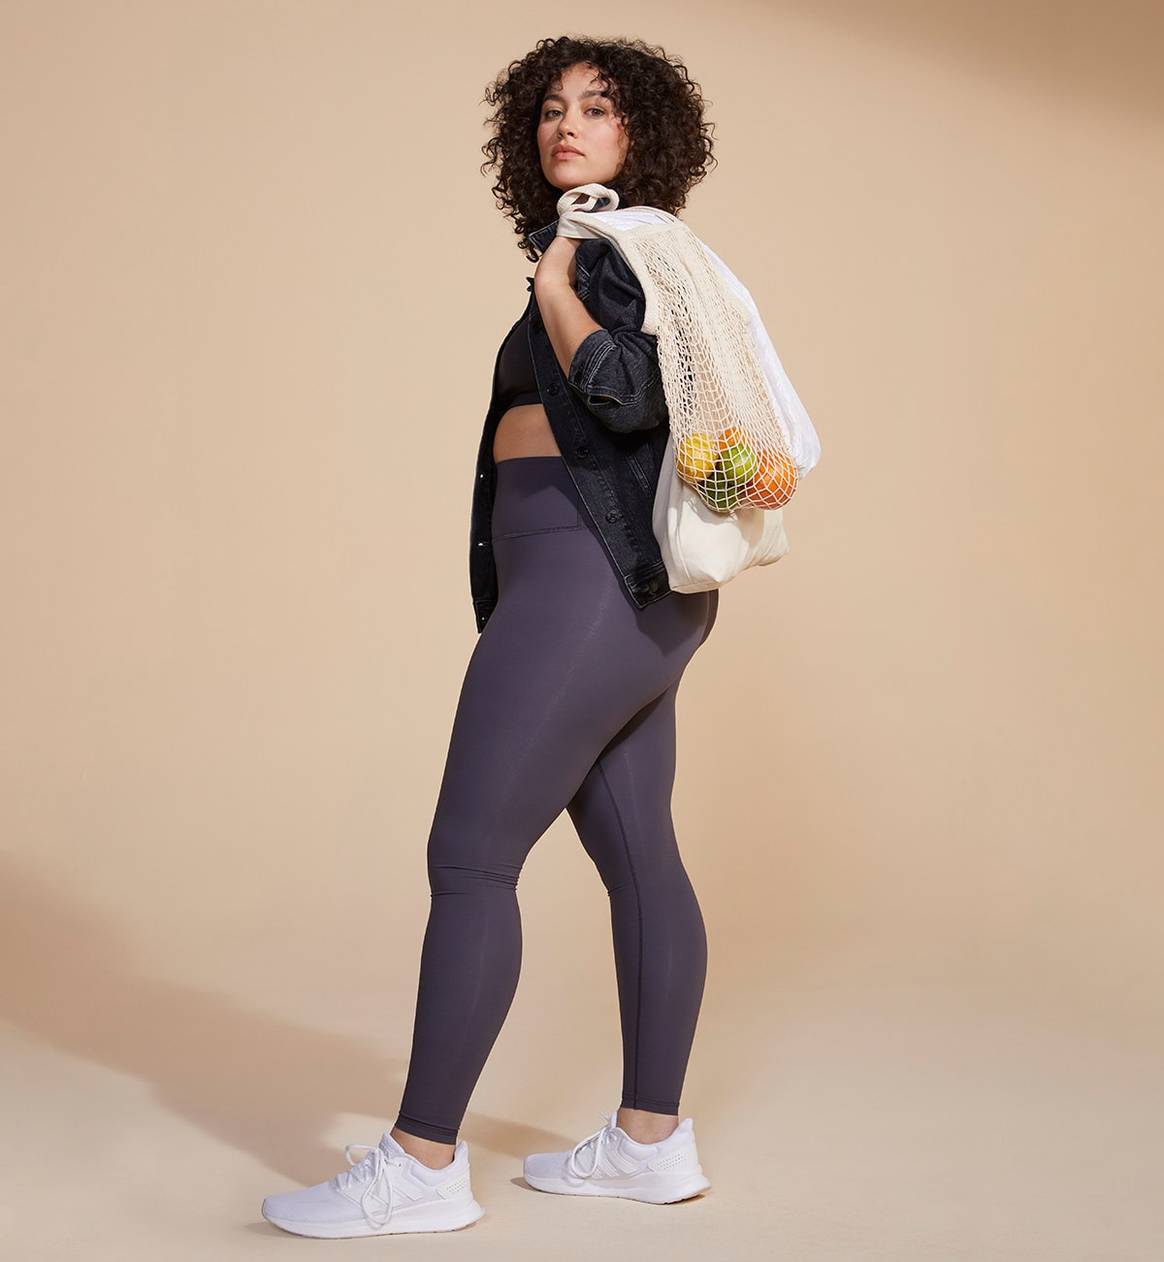 Everlane expands into activewear with sustainable leggings